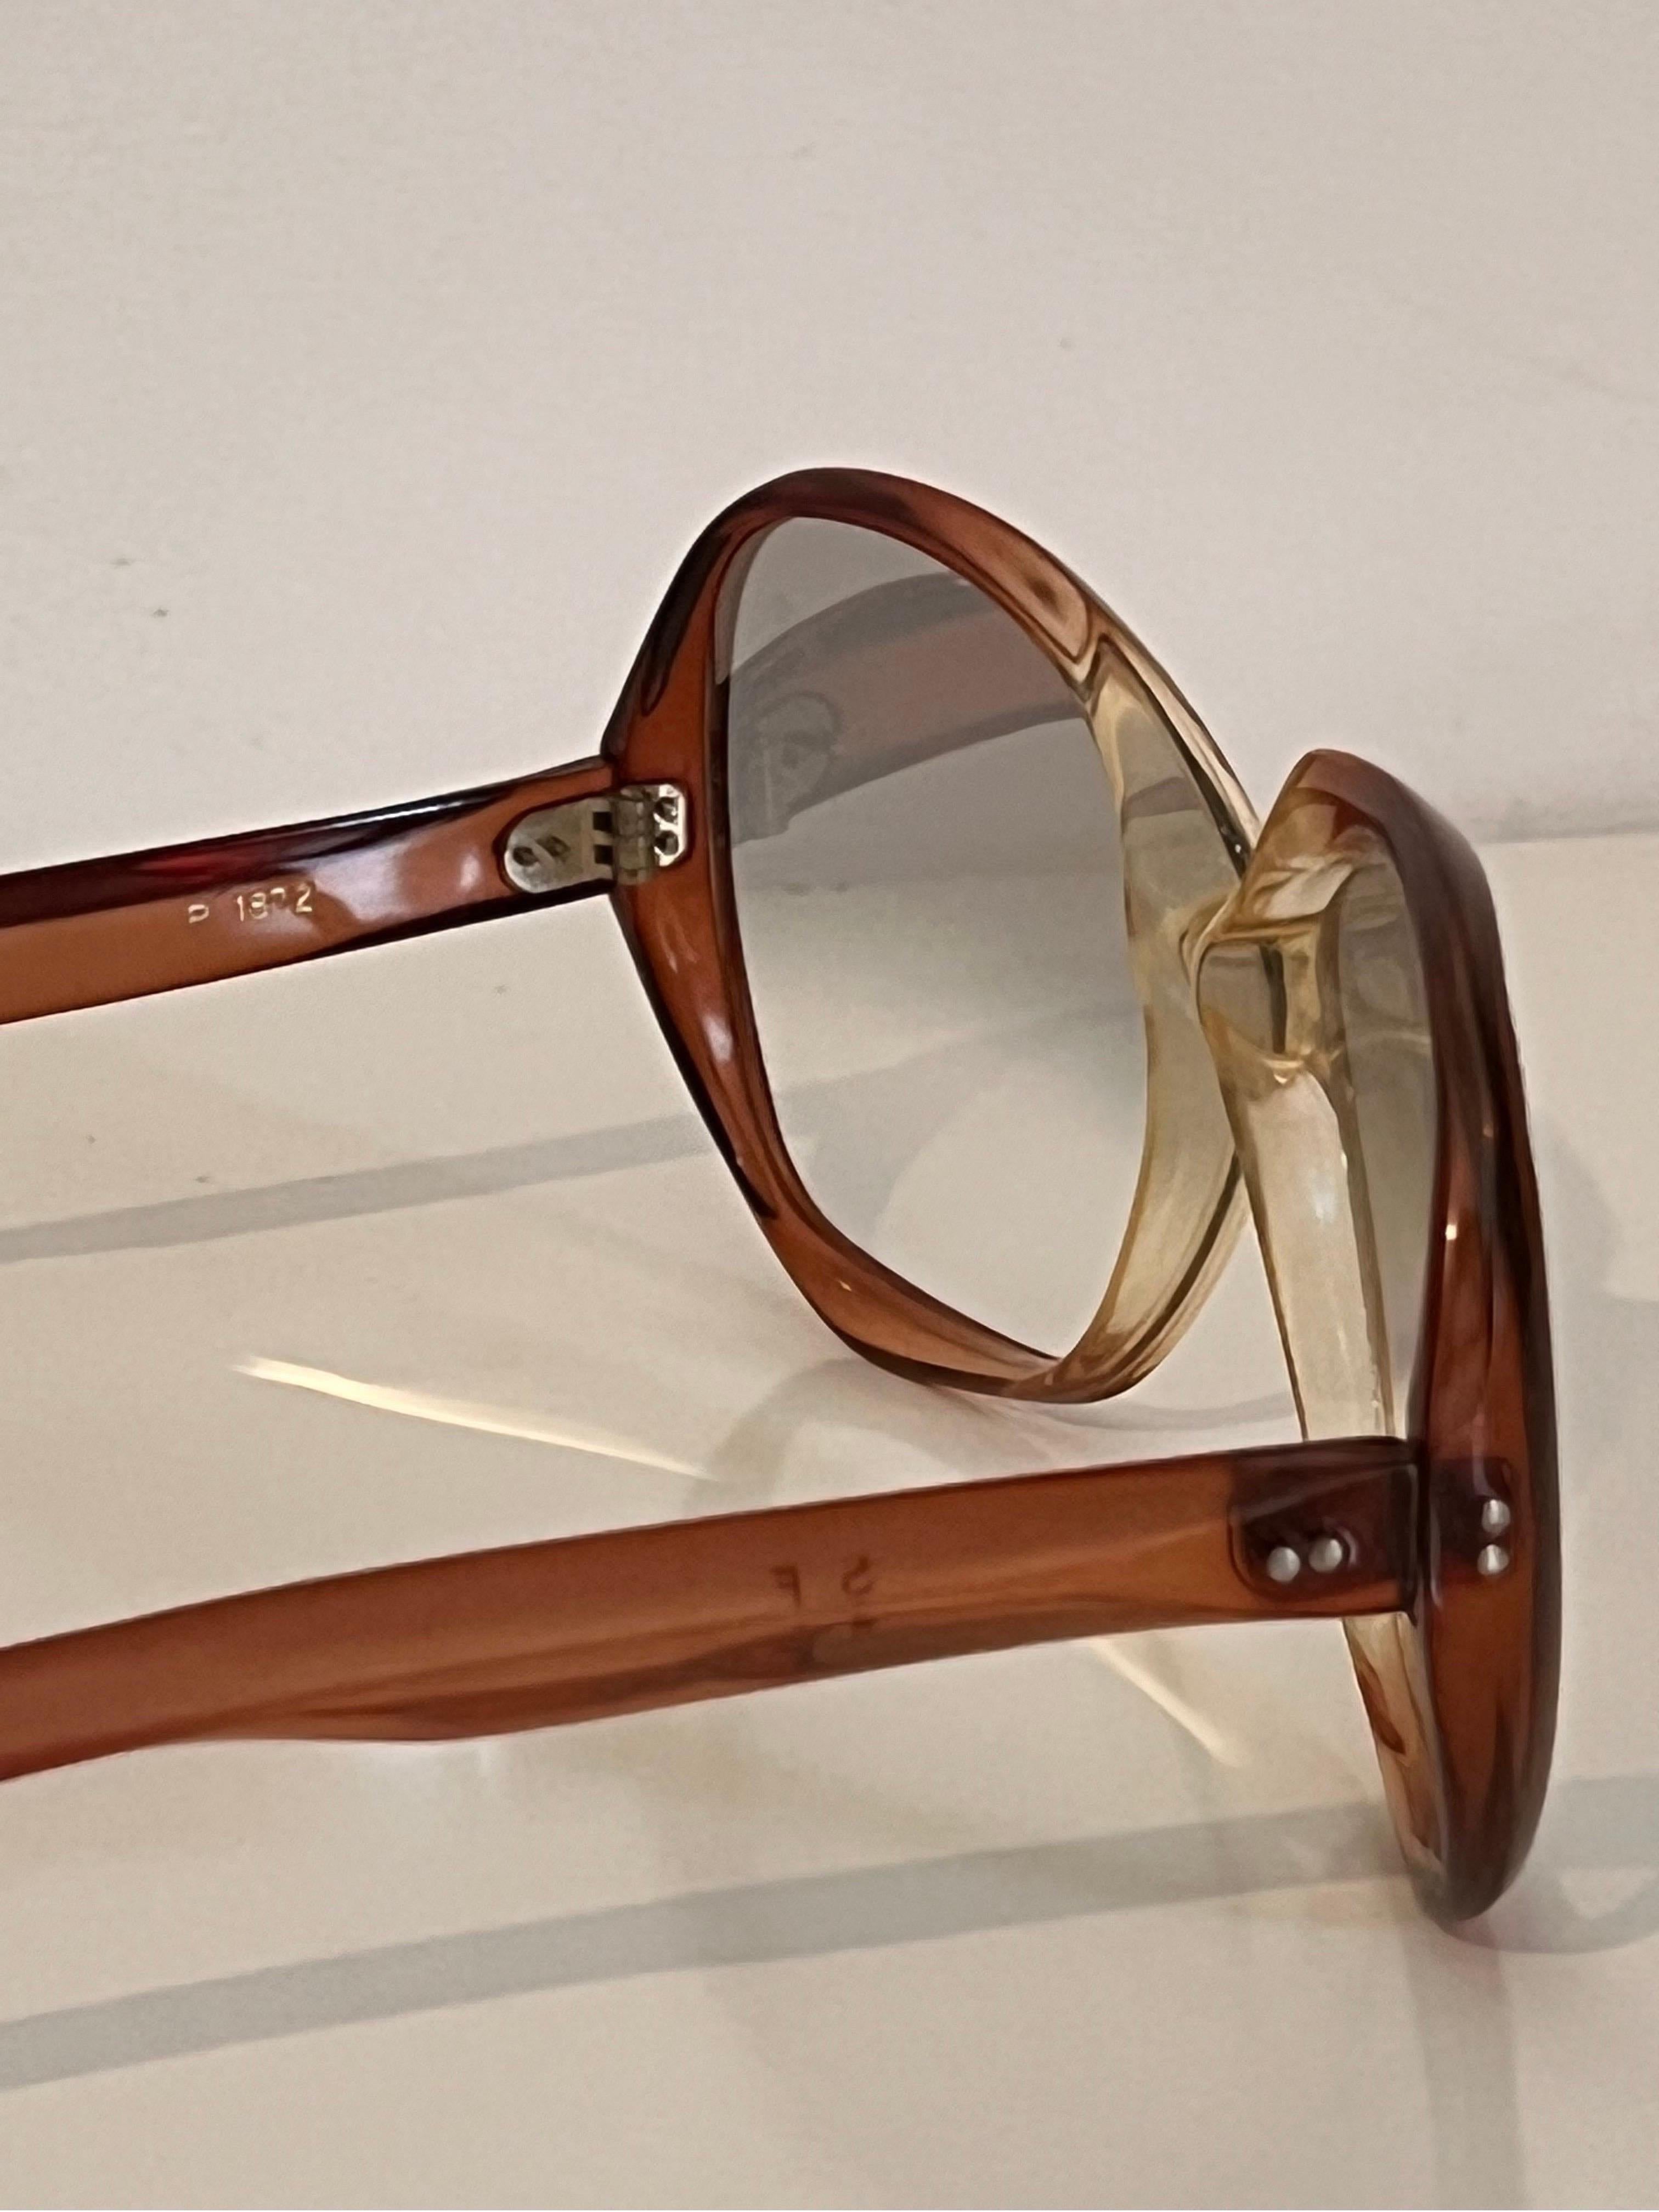 Vintage super 1970’s amber/brown sunglasses by Polaroid with polarised graduated tint lenses

A chic style from the 1970’s with a flattering shape that feels timeless 

Lenses are in perfect condition 

Very good vintage condition